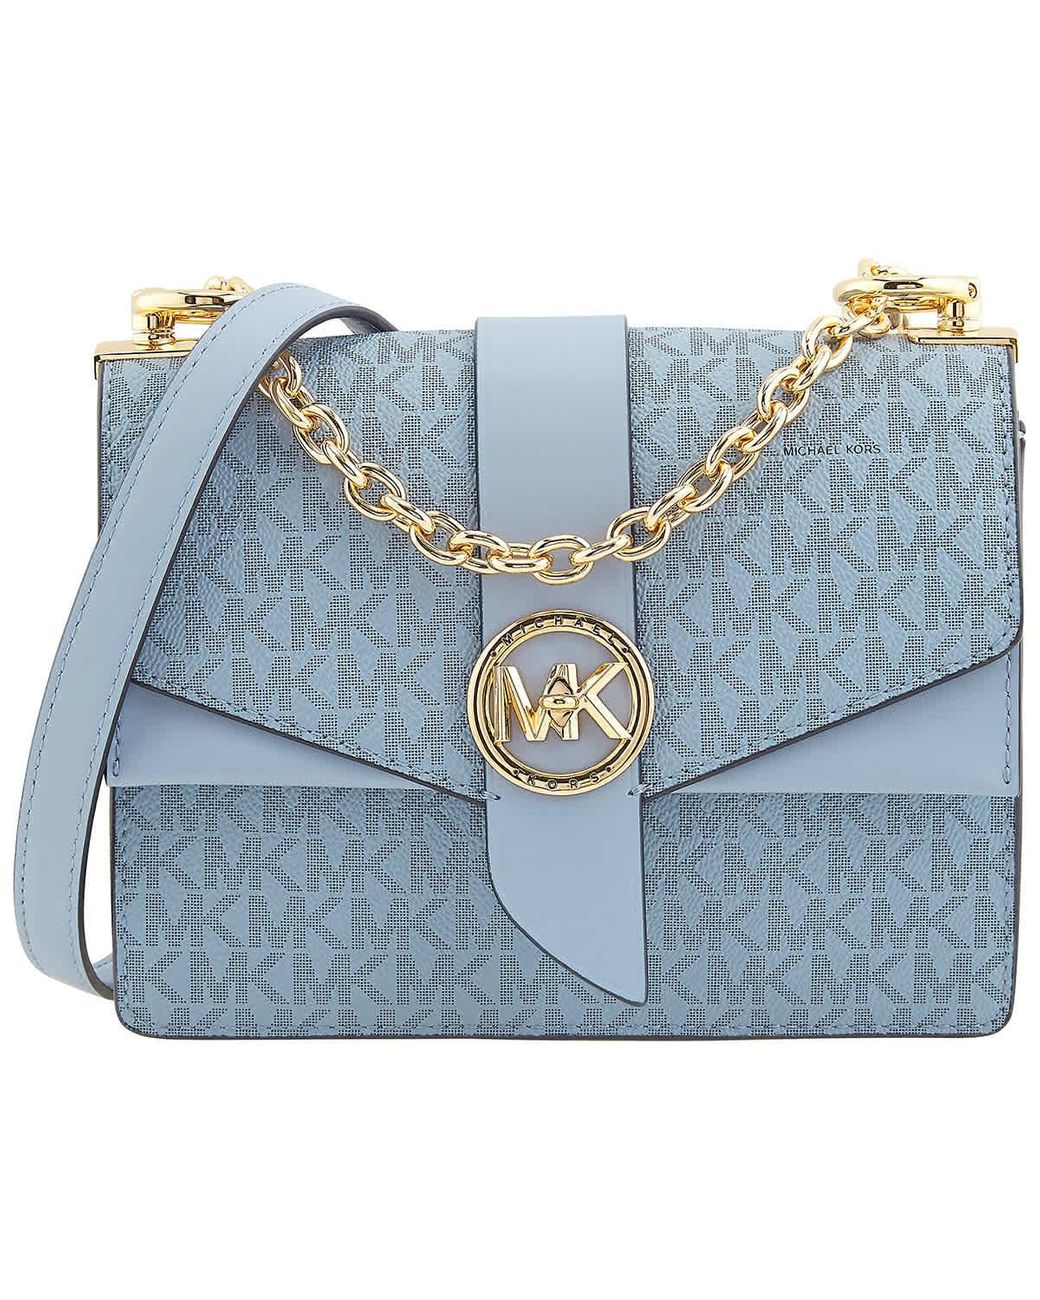 Michael Kors Ladies Hally Extra-small Shoulder Bag in Pale Blue